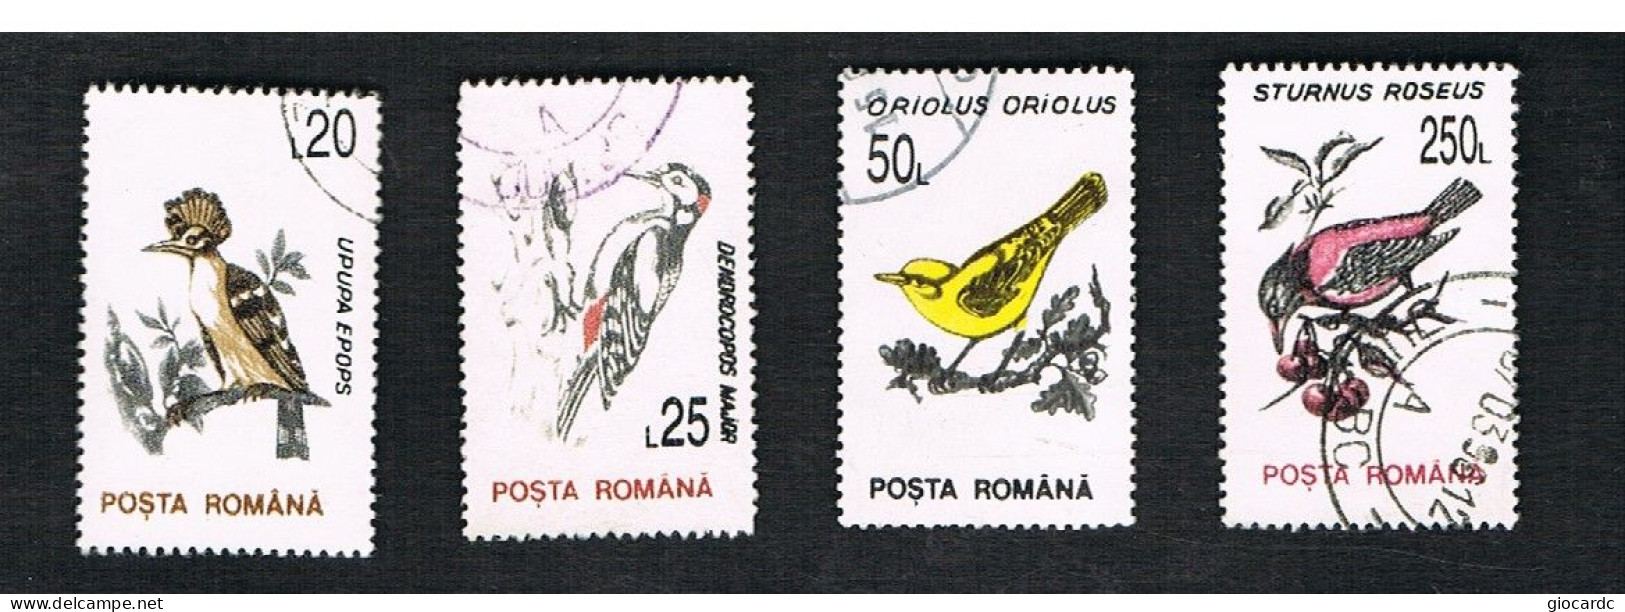 ROMANIA - SG 5510.5509  - 1993  CURRENT SERIE: BIRDS (4 STAMPS OF THE SET ON WHITE PAPER)  - USED ° - - Used Stamps